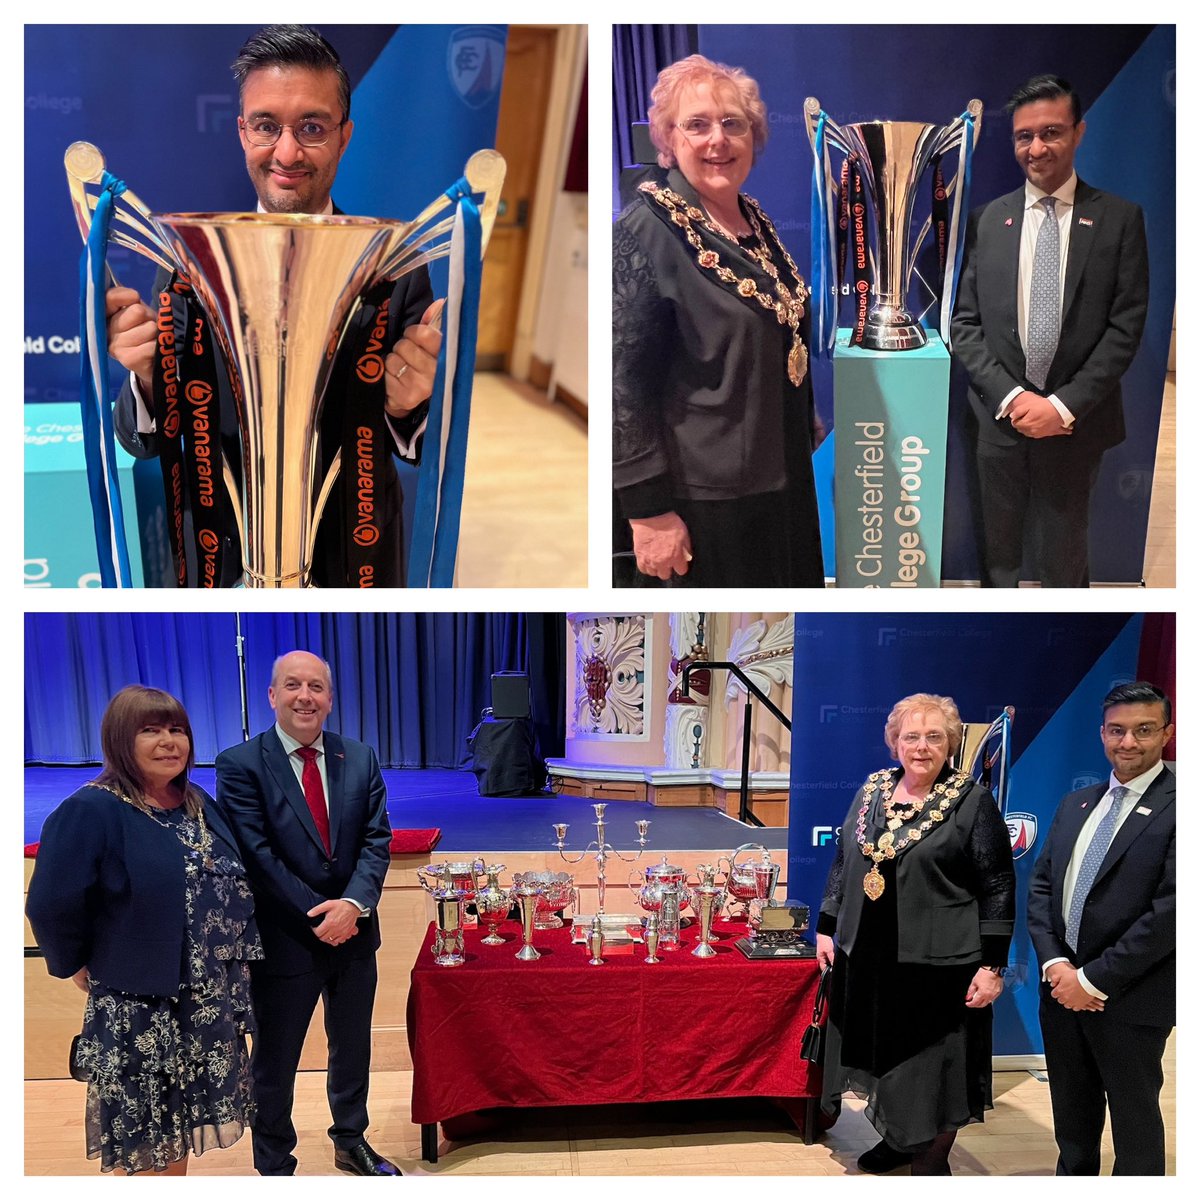 An honour to speak as Chair of @royalhospital #TeamCRH at the inauguration of Cllr Jenny Flood as new #Chesterfield mayor last night, alongside @Bowen_Huw Looking forward to working together for our communities, & great to hold the @ChesterfieldFC trophy ⚽️ (🙏 @JohnCroot1!)